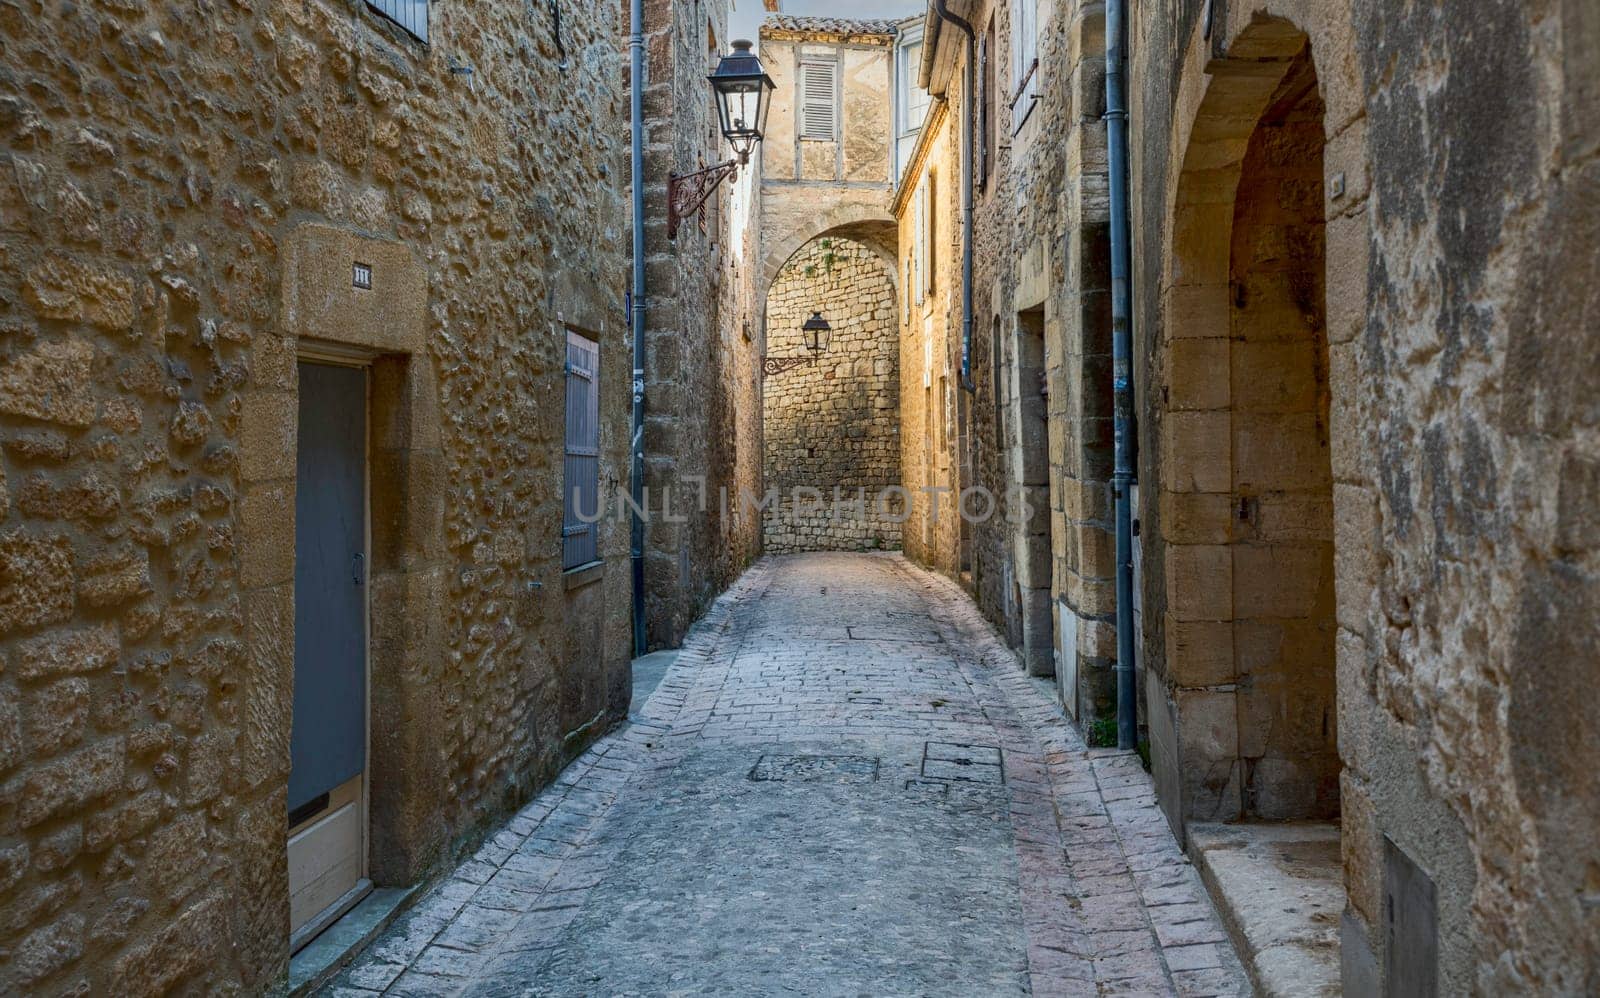 Typical narrow street in the medieval Old Town of Sarlat la Caneda, Perigord, France